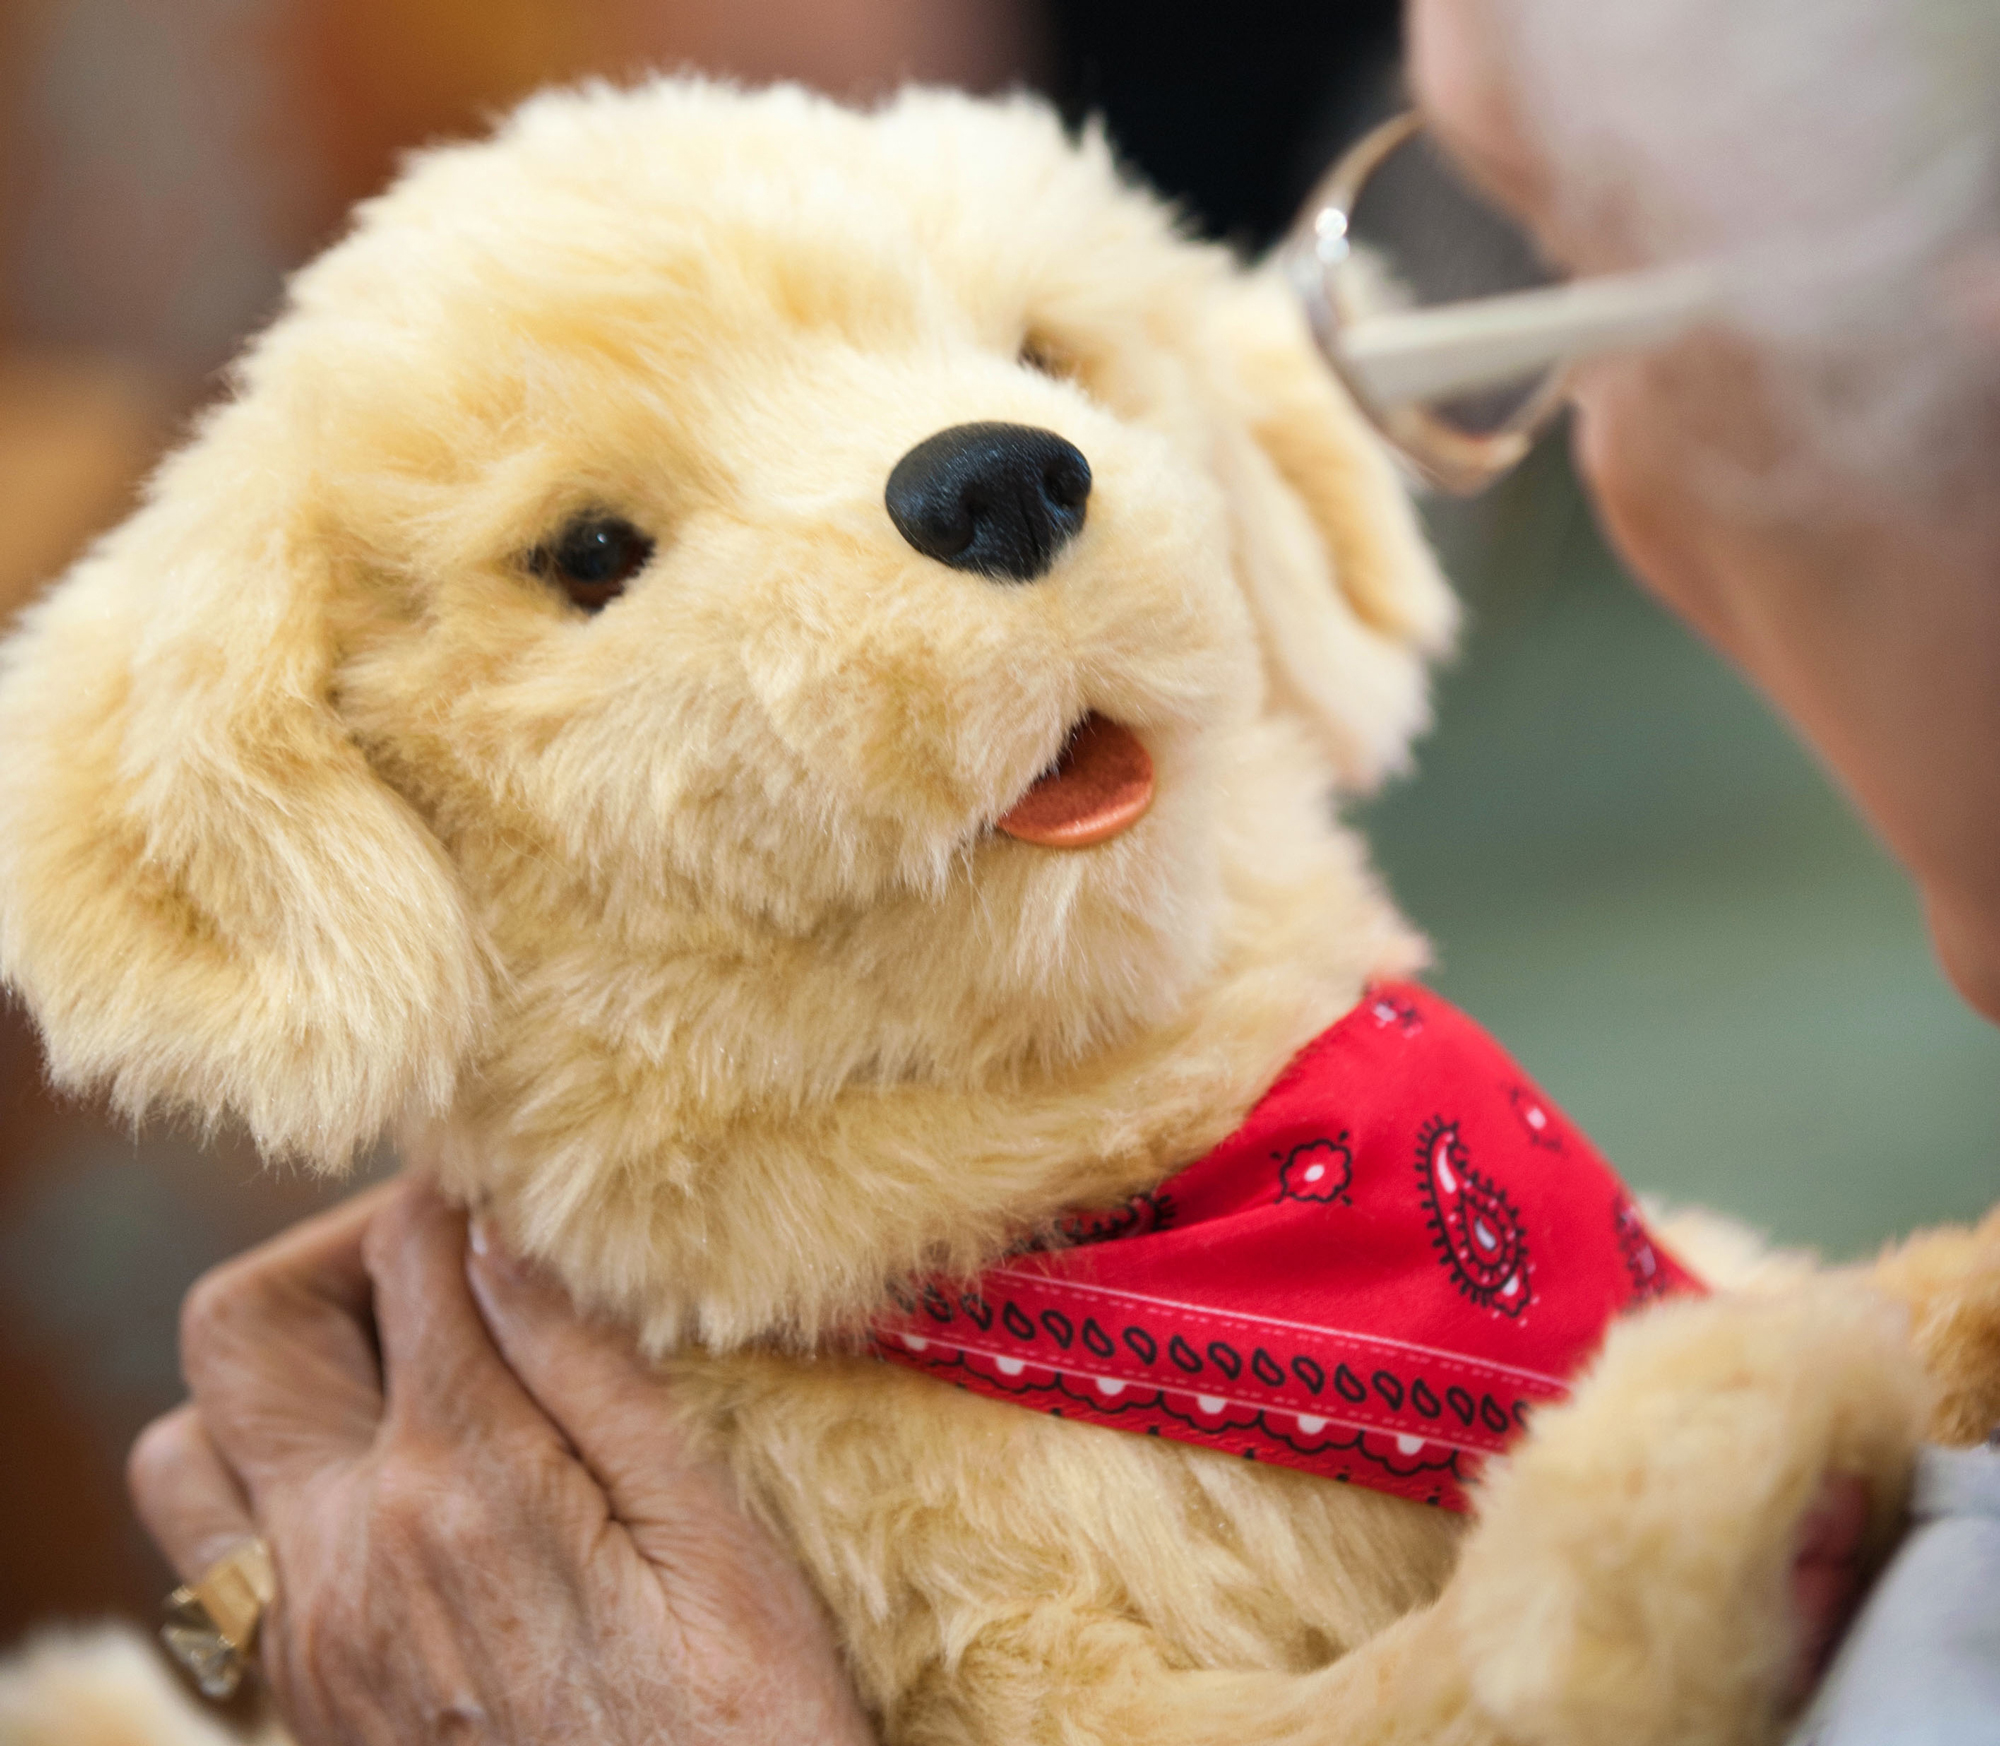 Your Lonely Grandparents Can Now Get A Robot Retriever To Keep Them Company